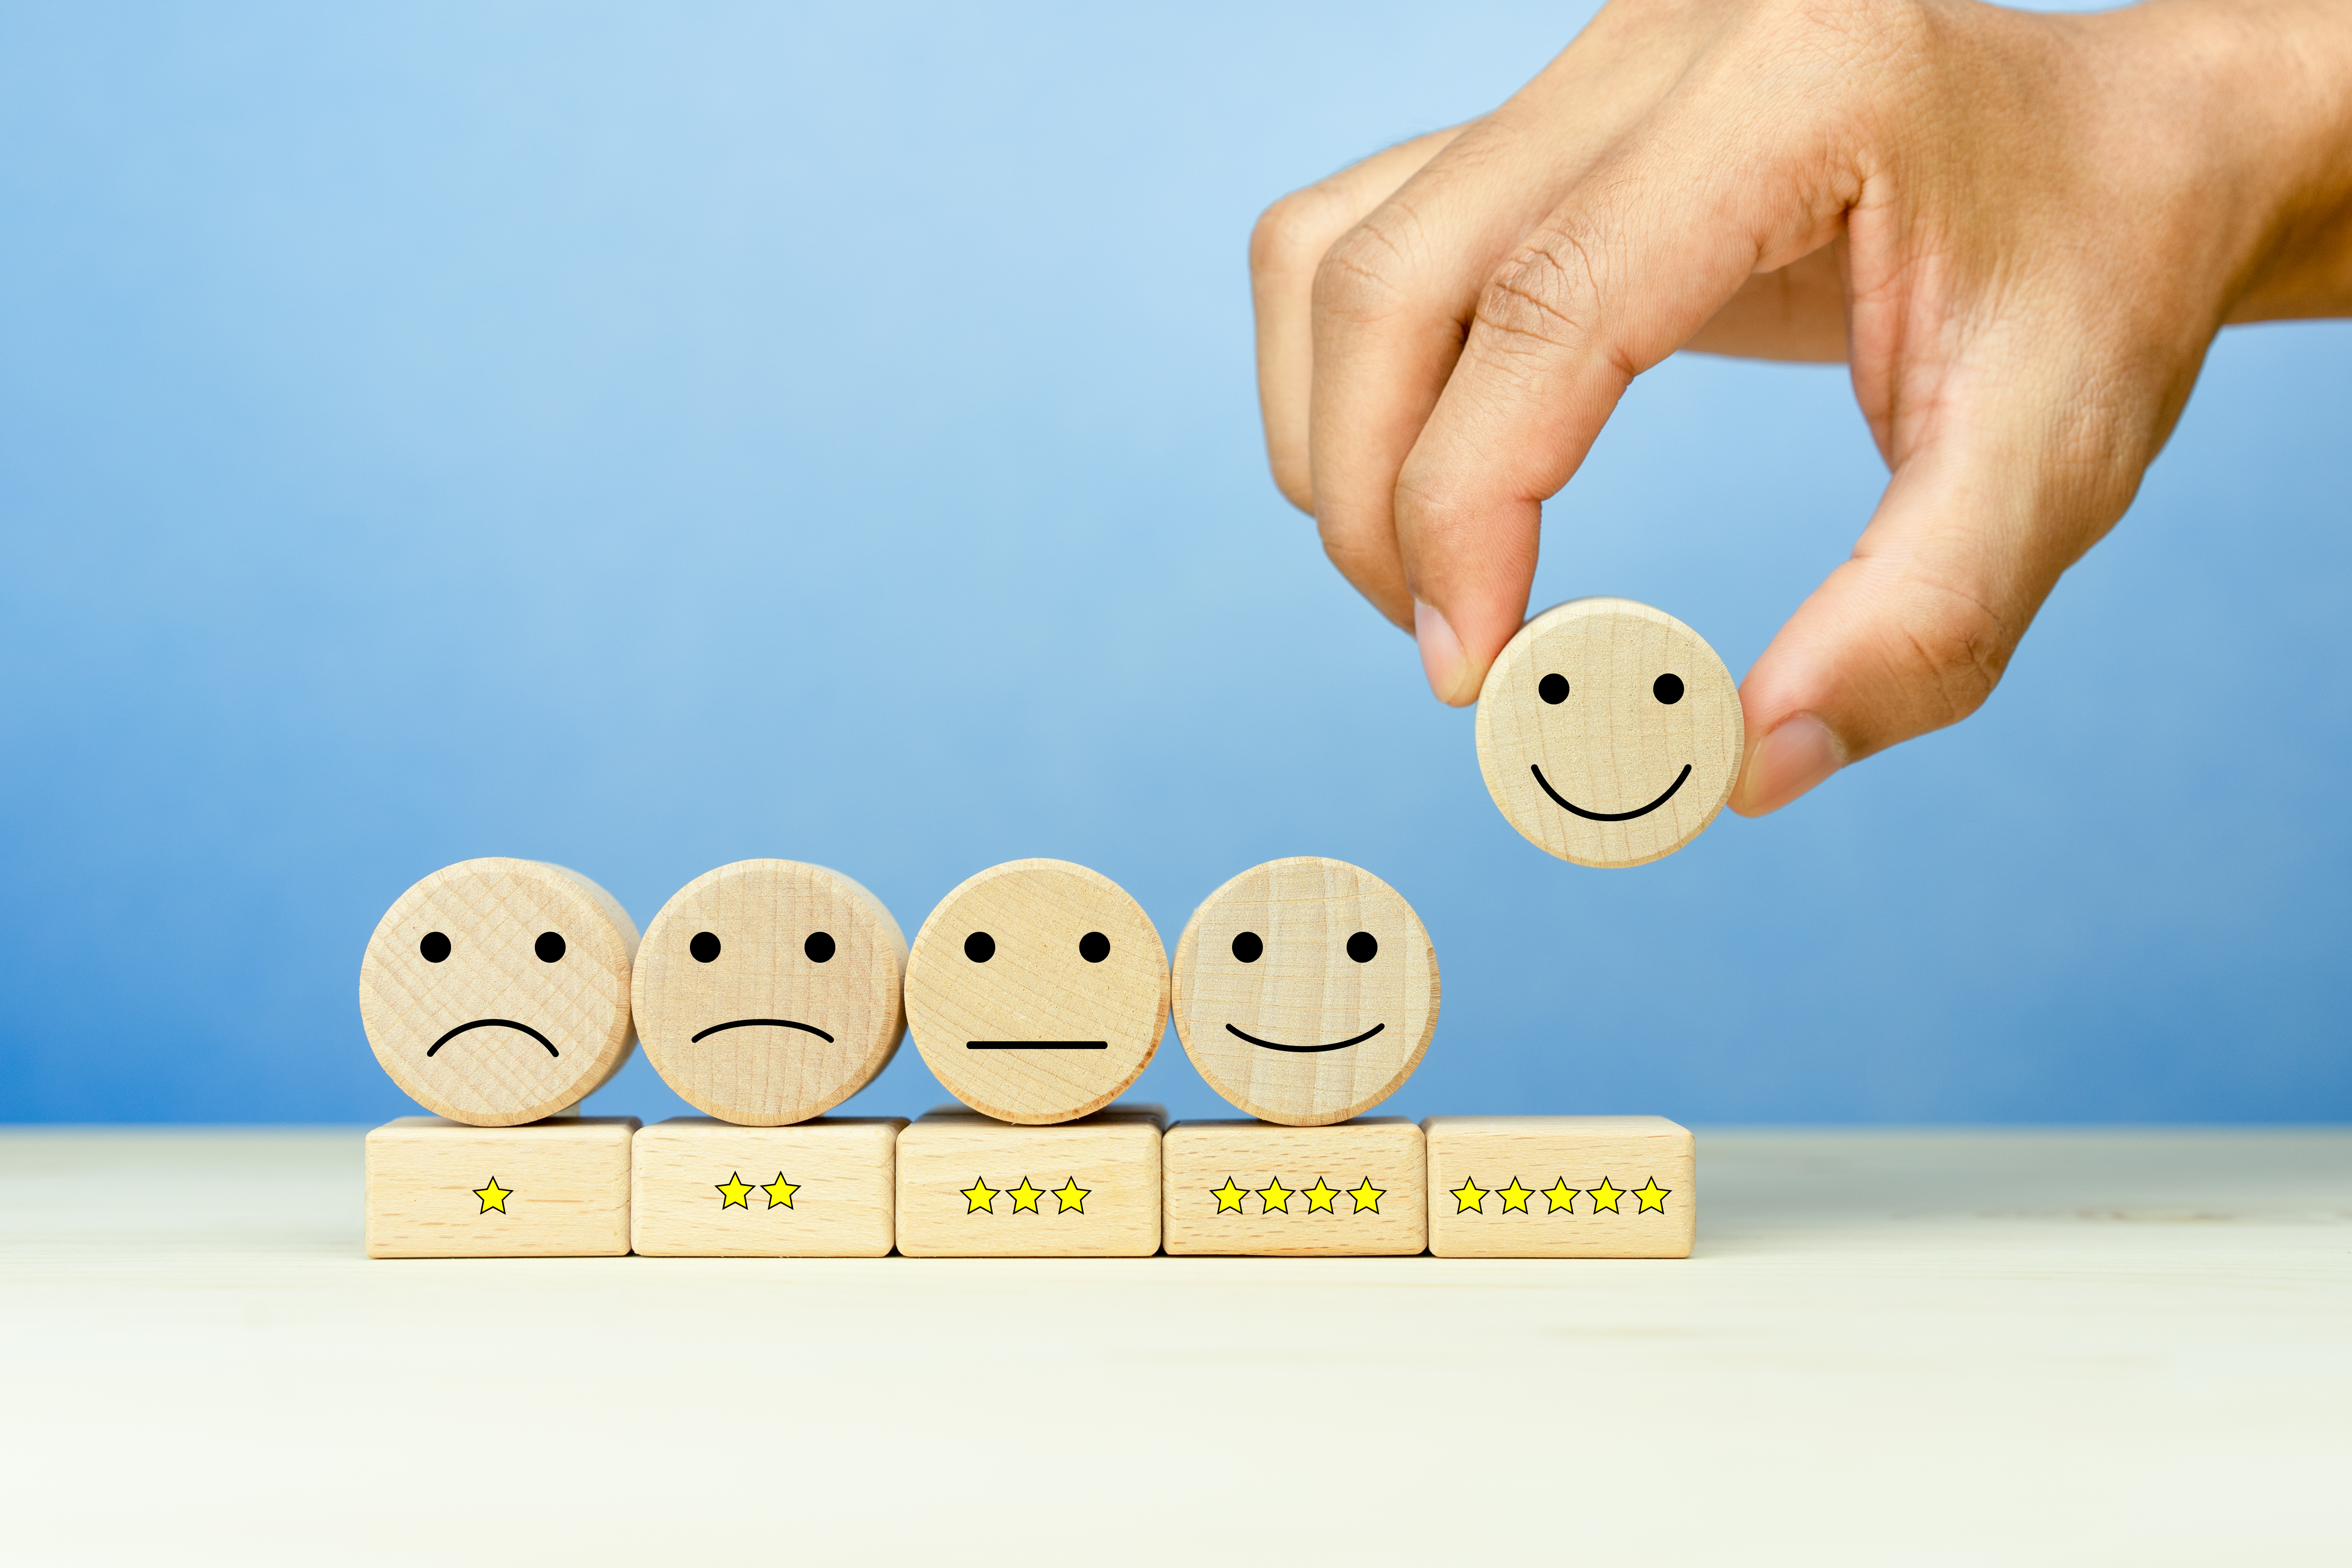 A New Study Details the Connection Between Customer and Employee Happiness